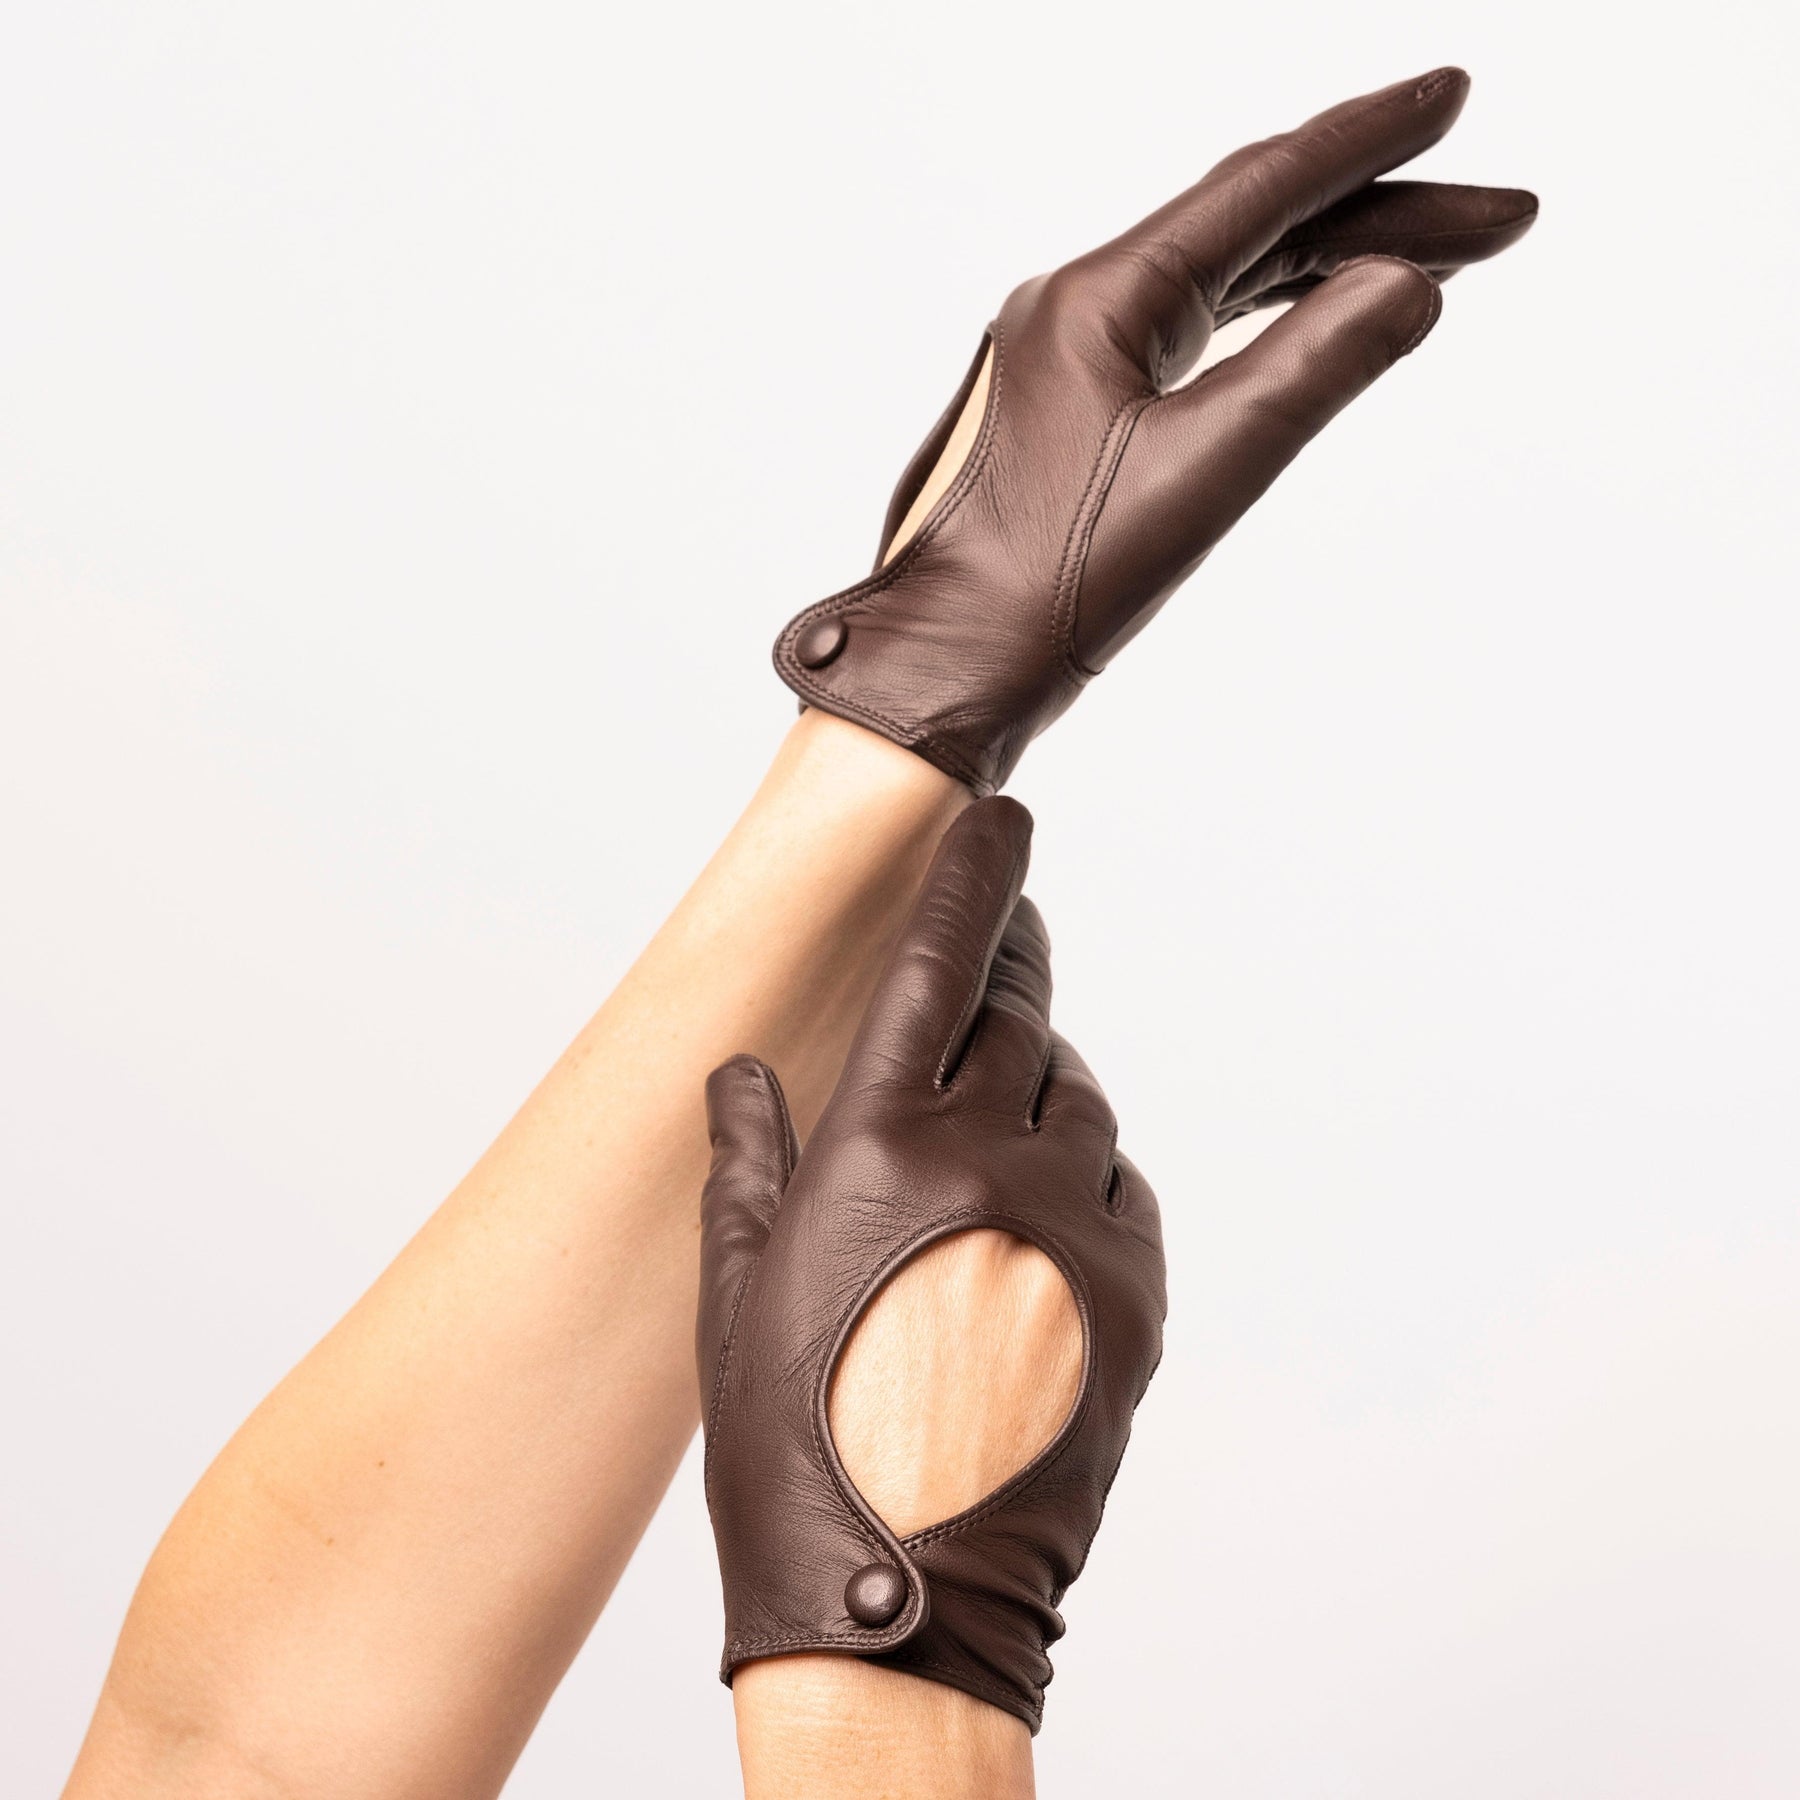 Leather fingerless gloves, Brown leather gloves, Fingerless leather gloves